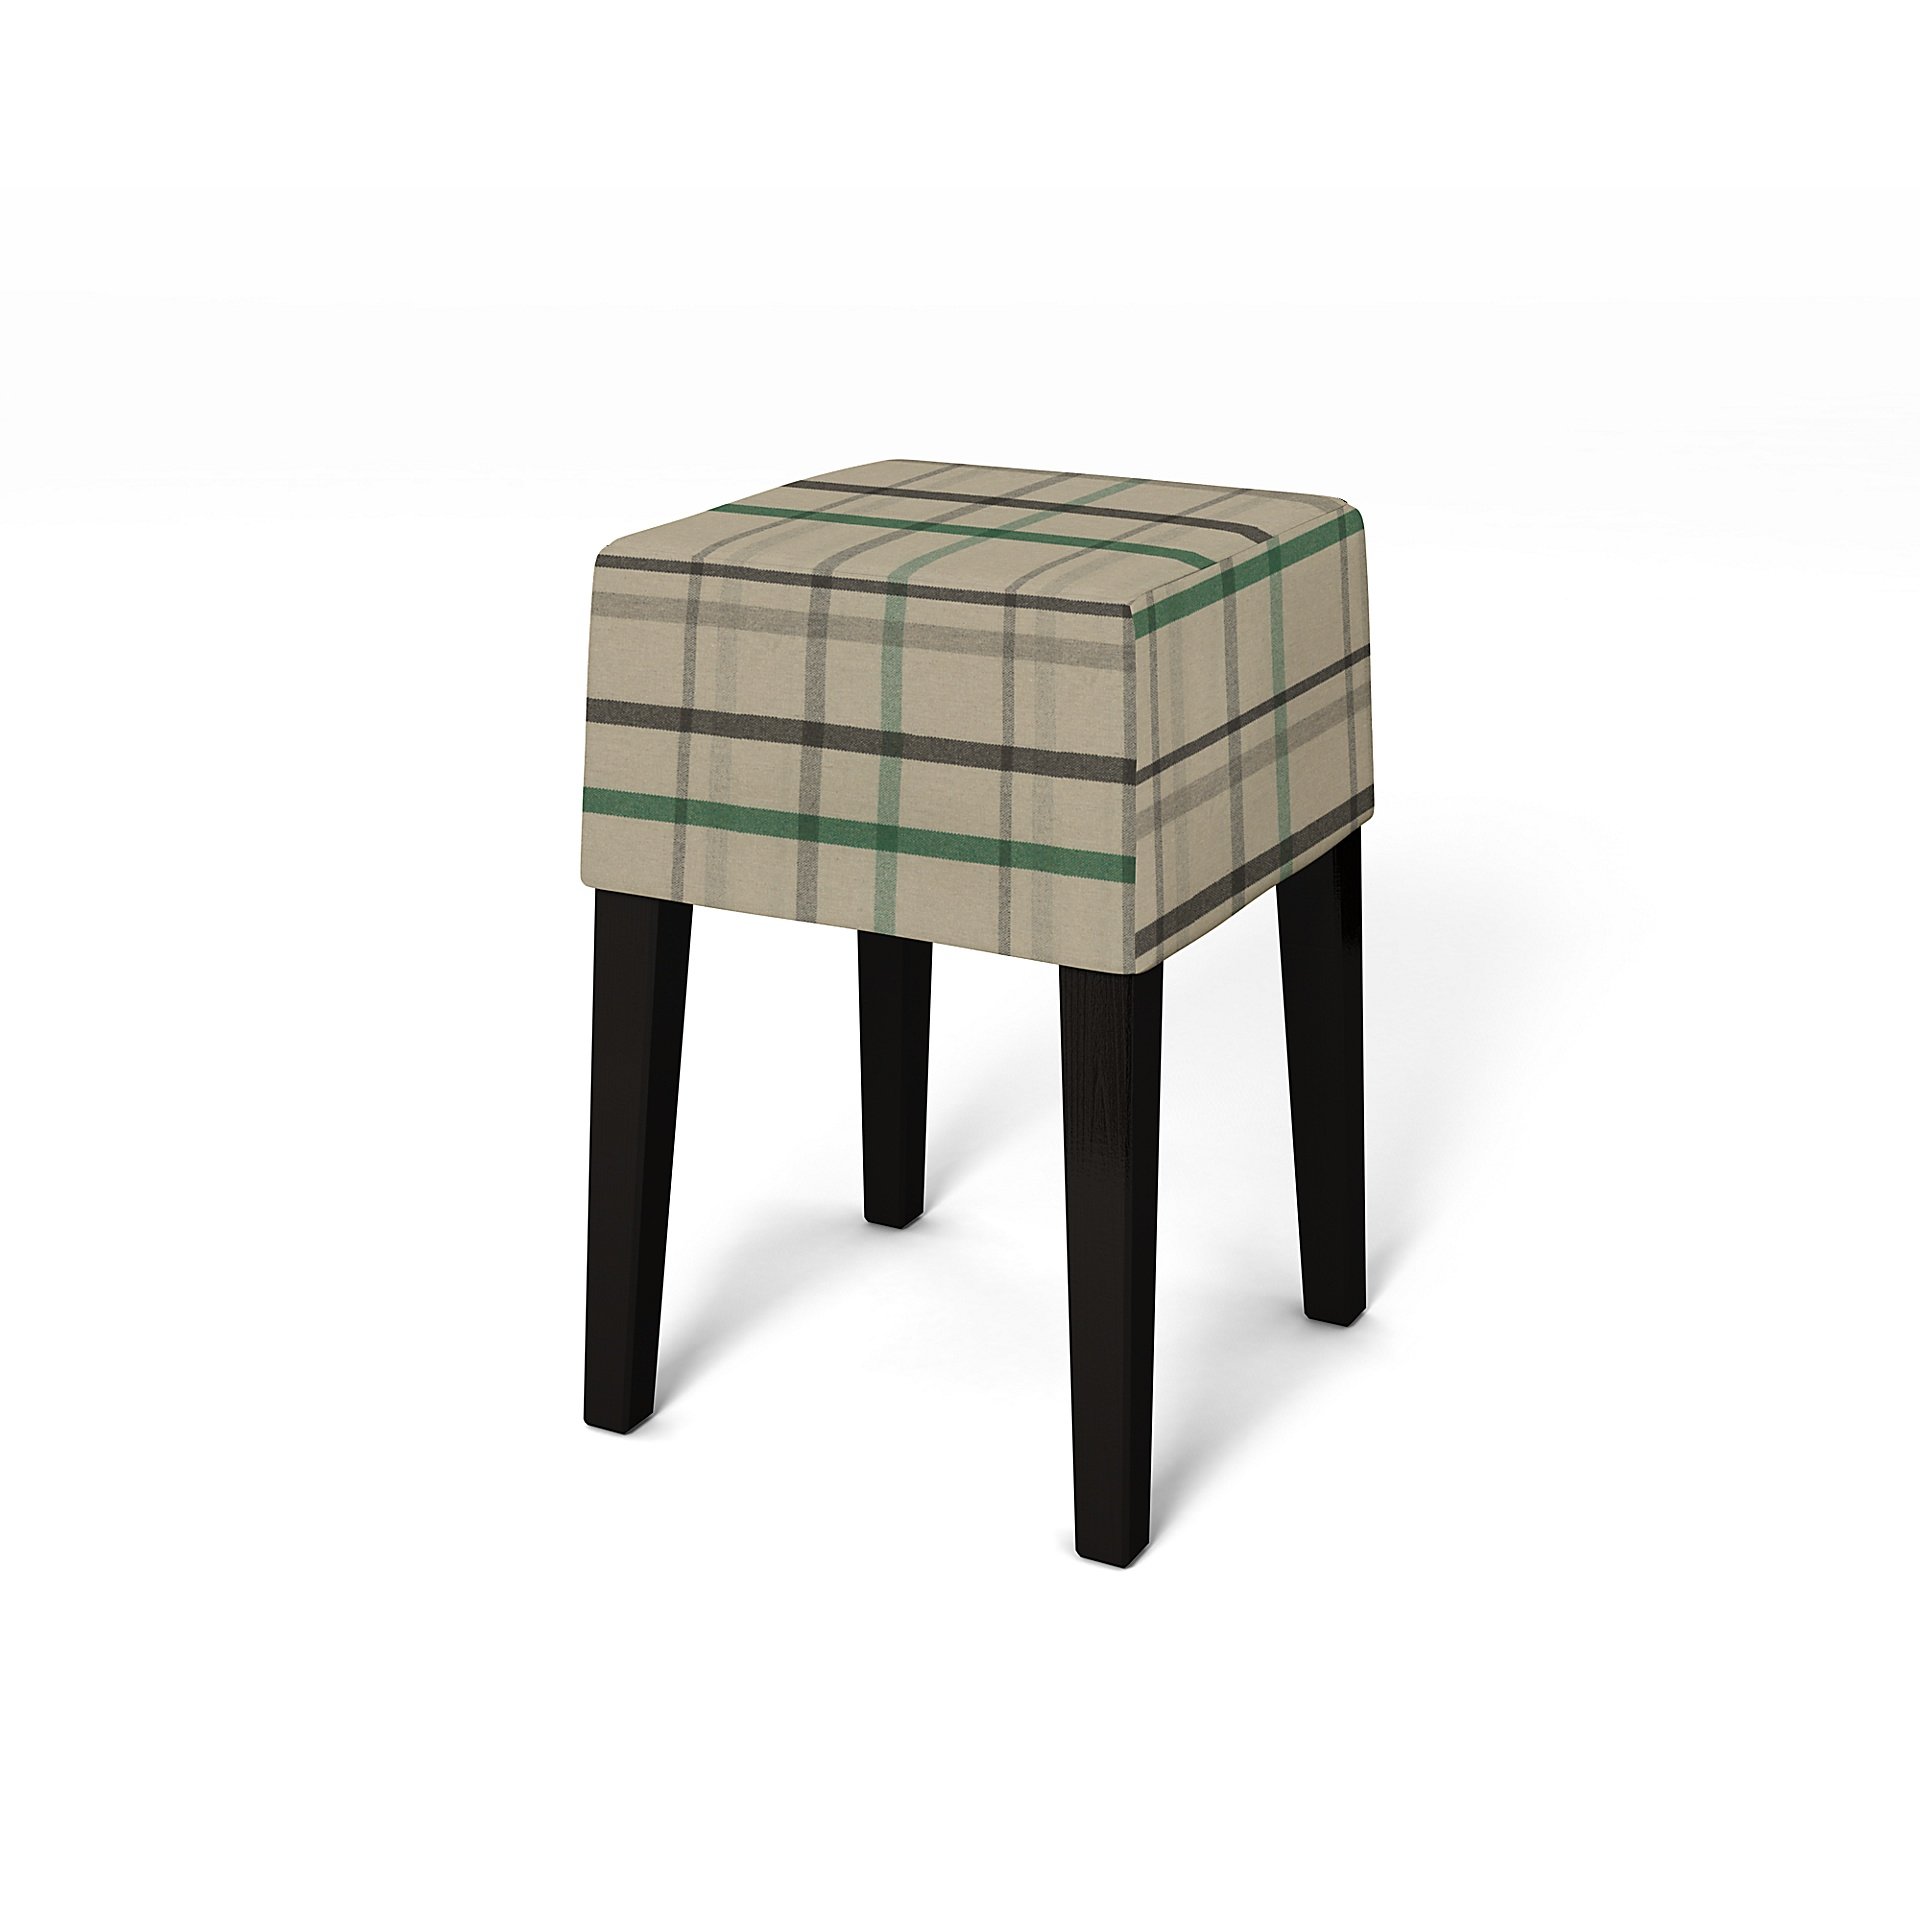 IKEA - Nils Stool Cover, Forest Glade, Wool - Bemz